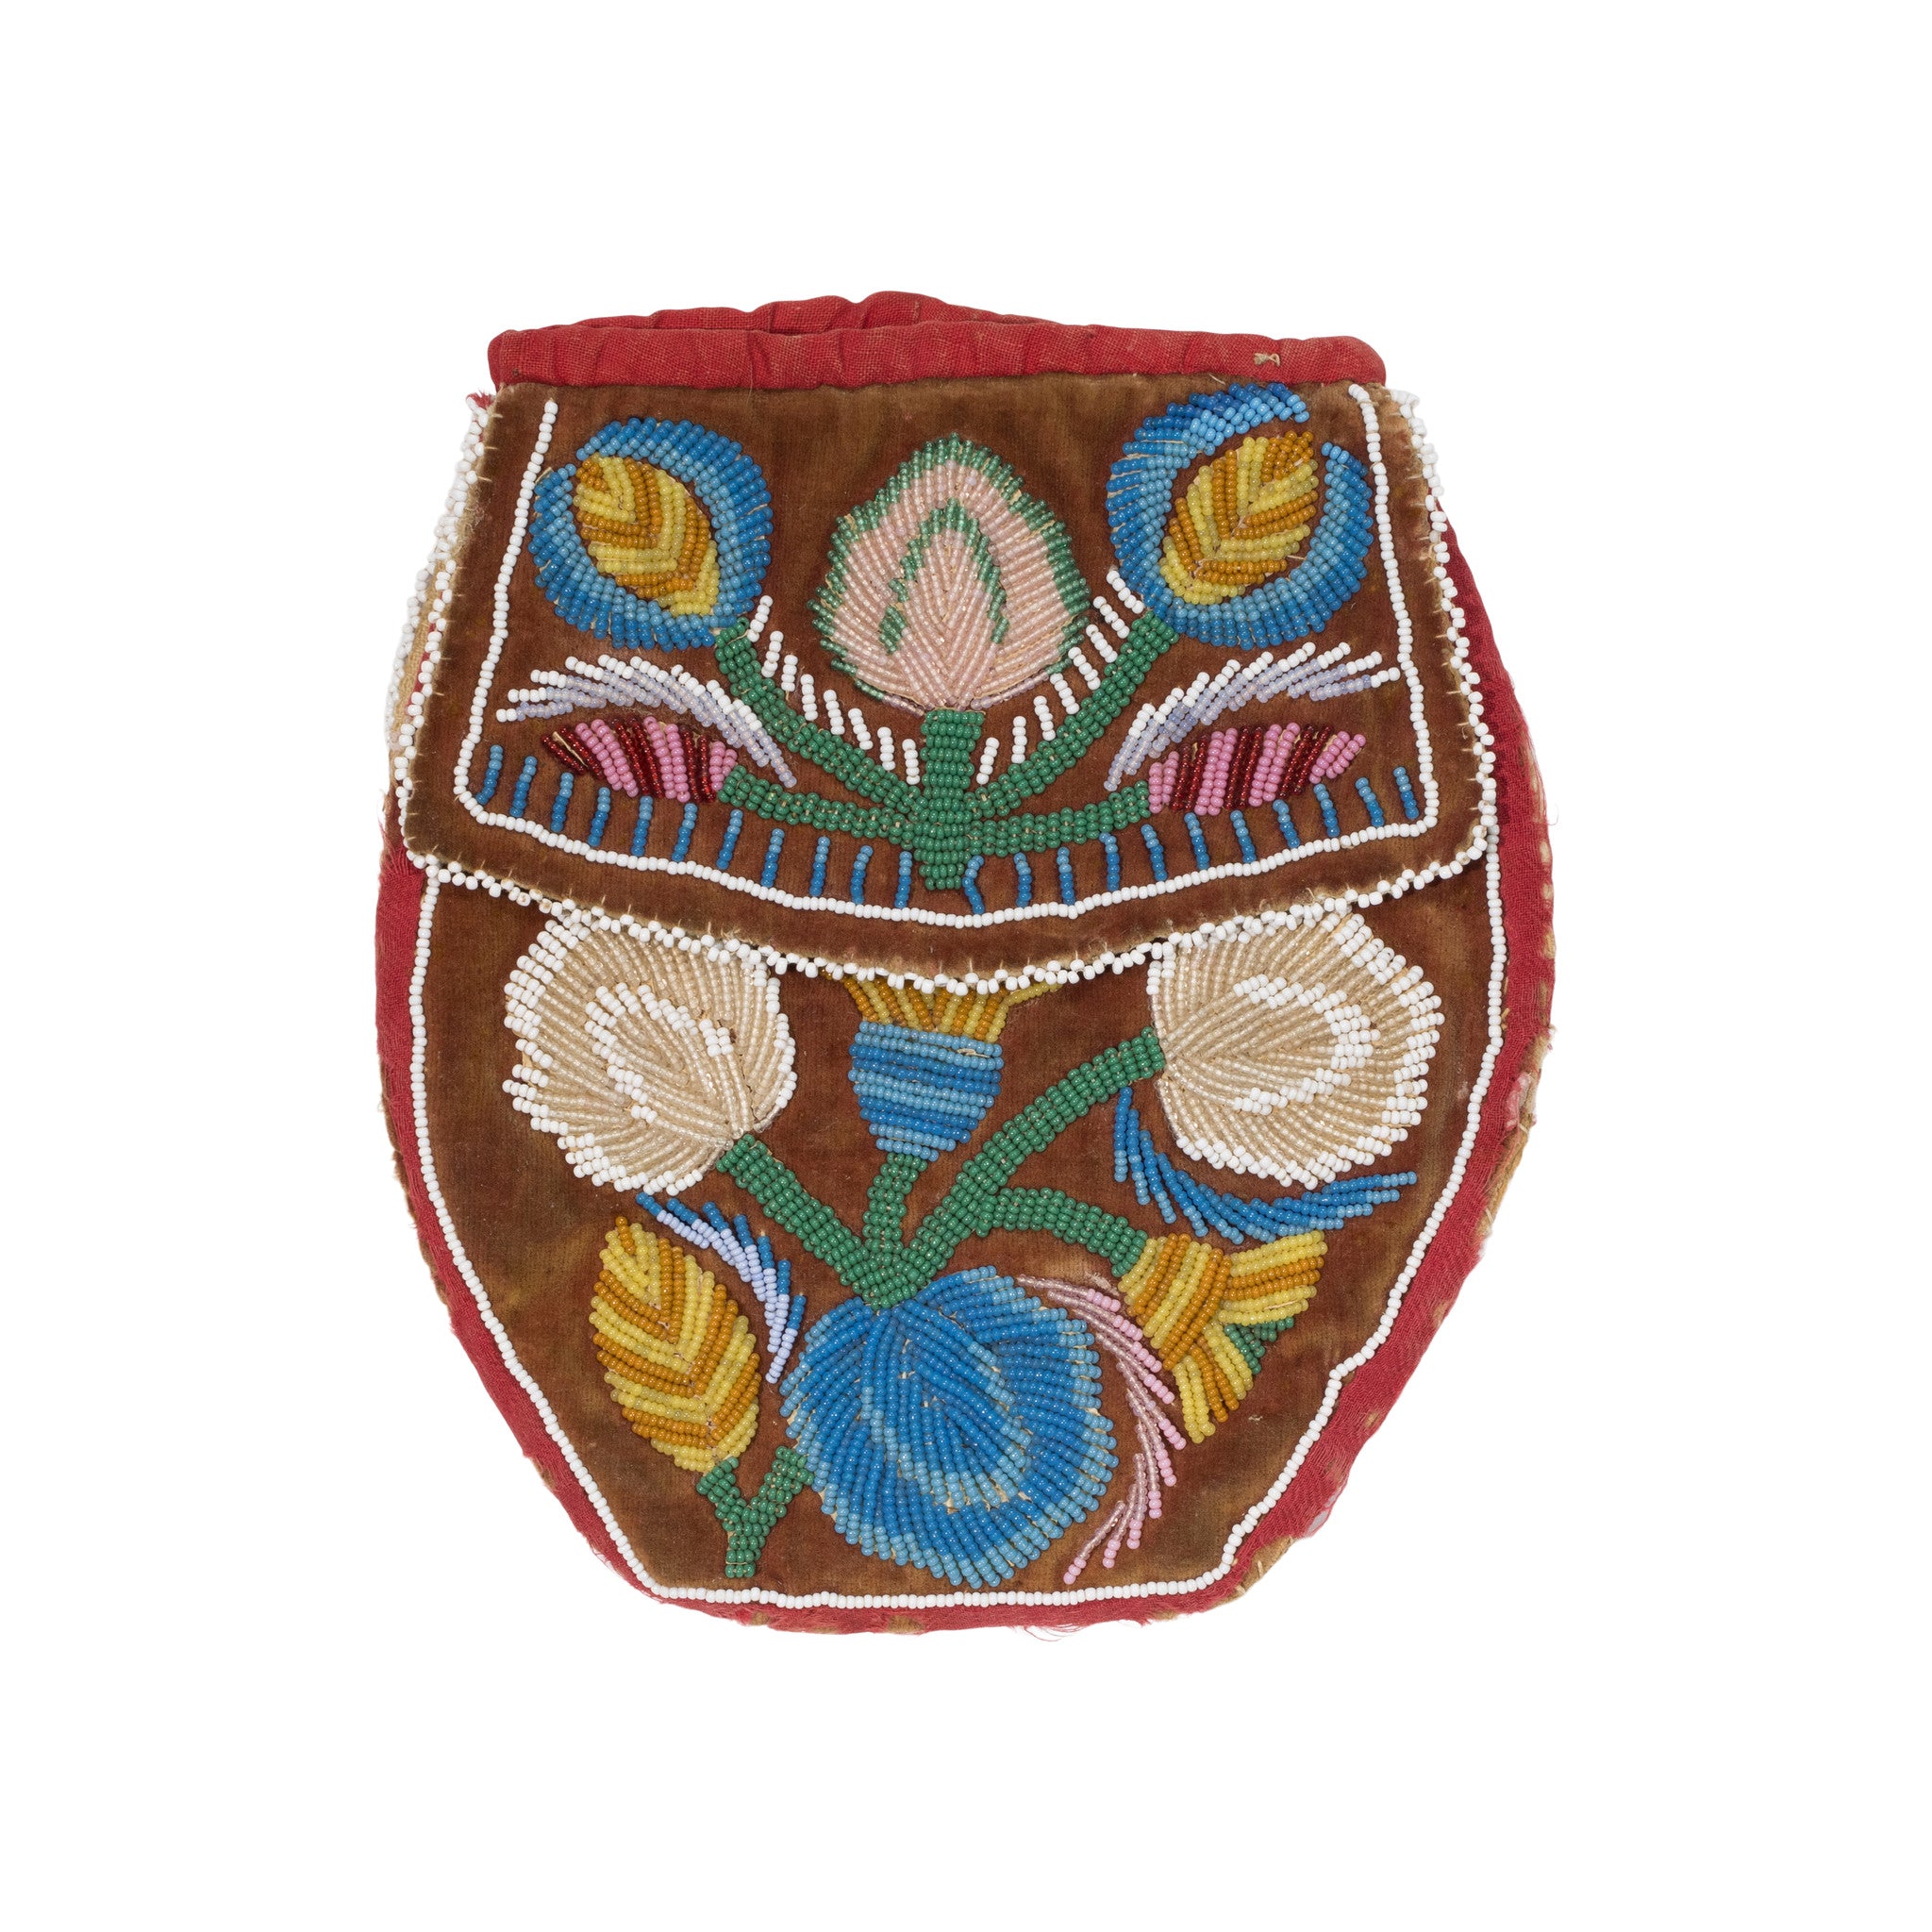 Iroquois Beaded Pouch